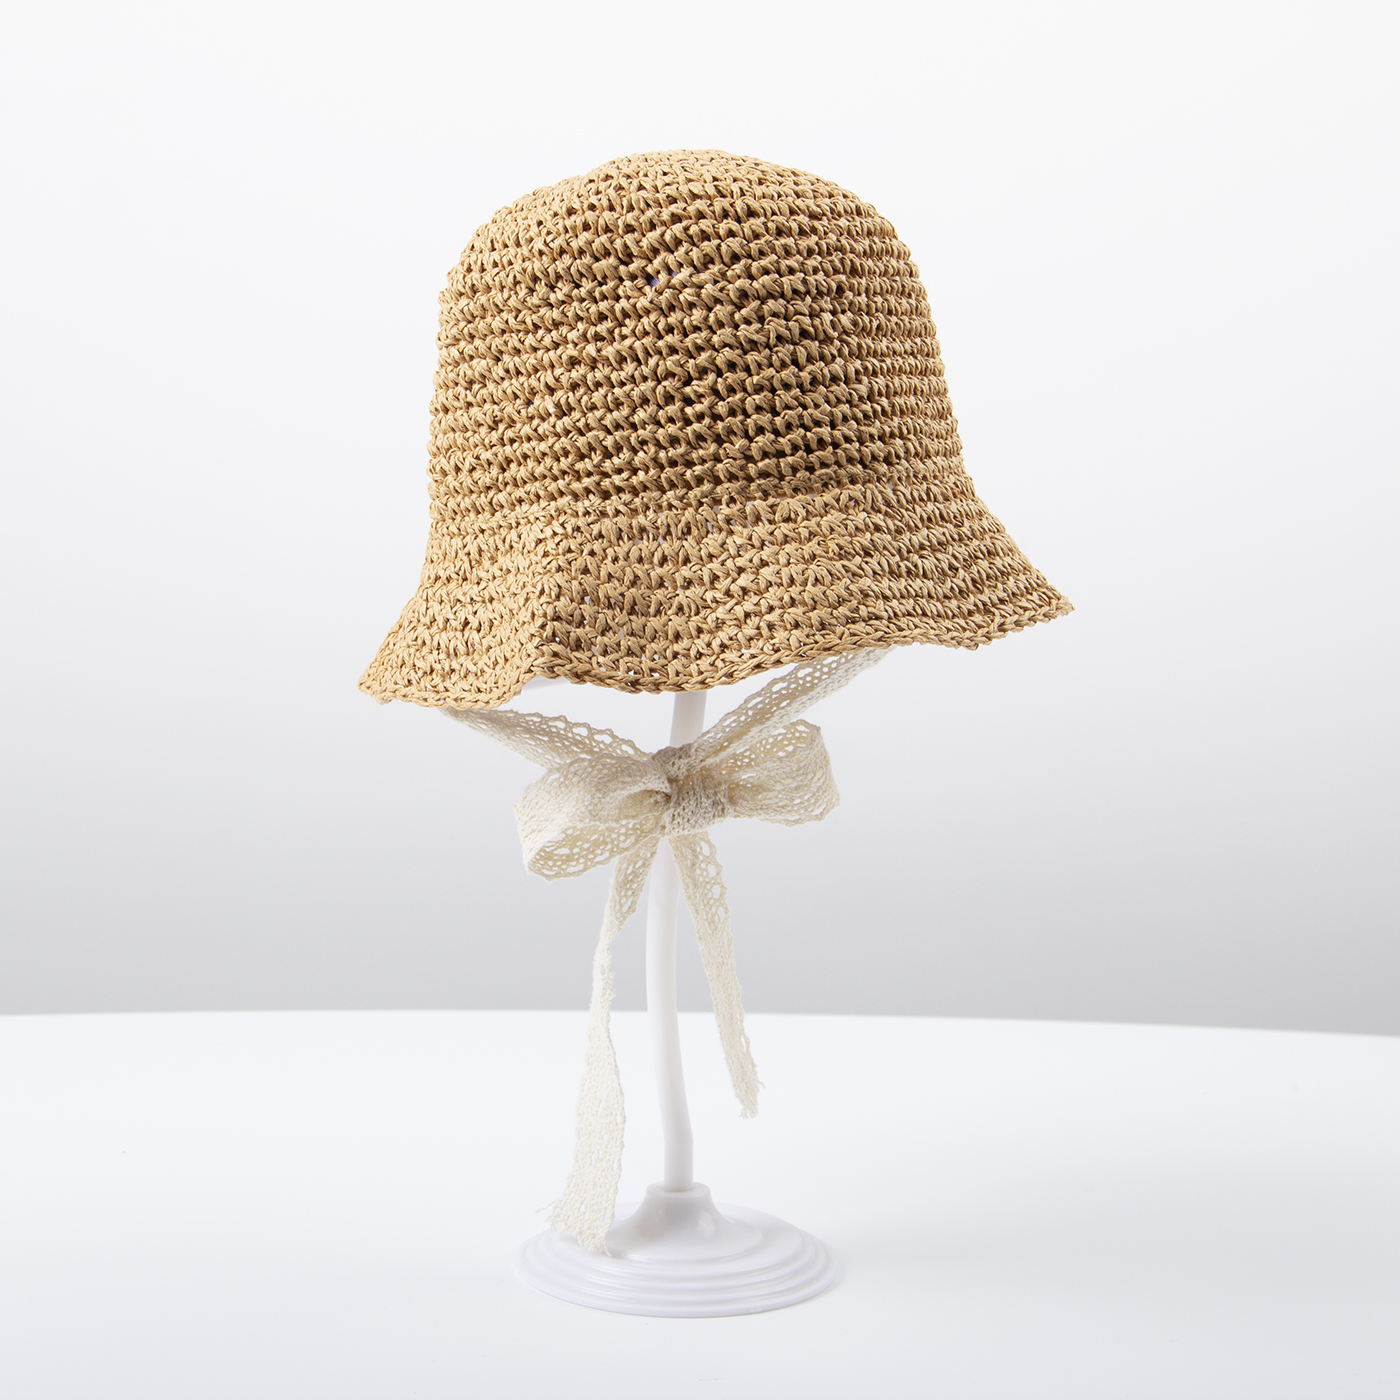 Baby Foldable Crochet Straw Hat With Lace Strap2